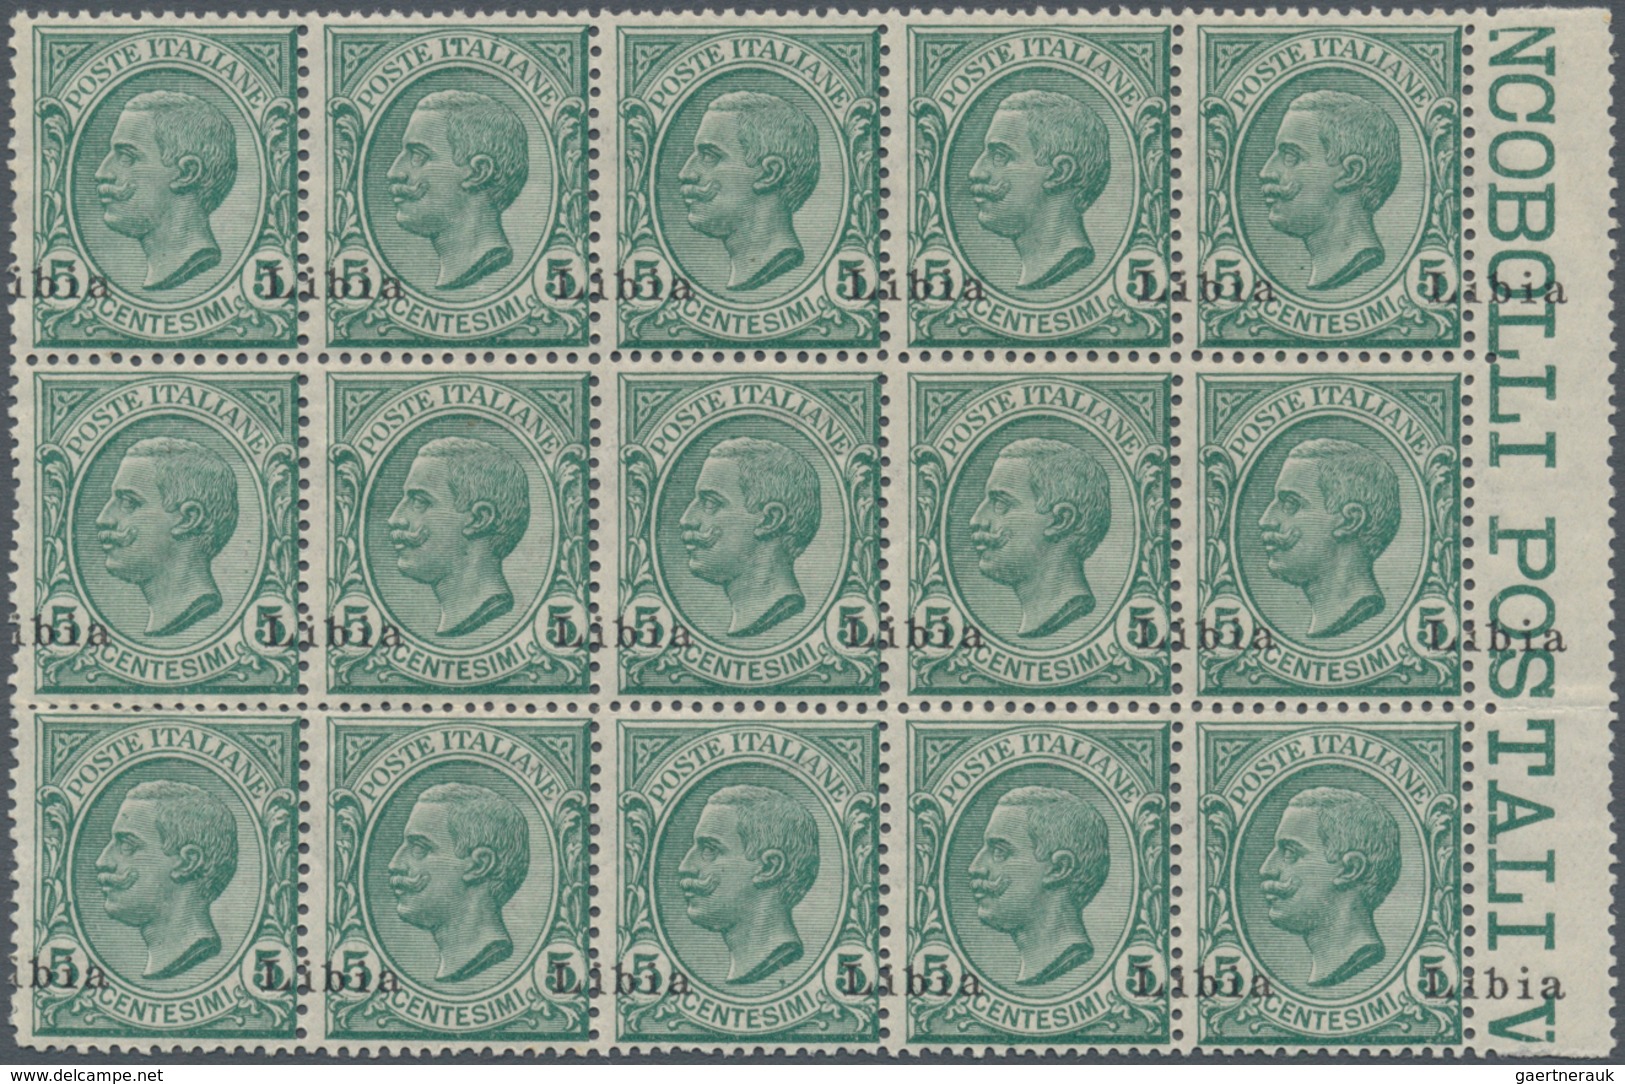 01059 Italienisch-Libyen: 1912/1915: 5 Green Cents With Overprint "Libia" Heavy Shifted To The Top And Rig - Libië